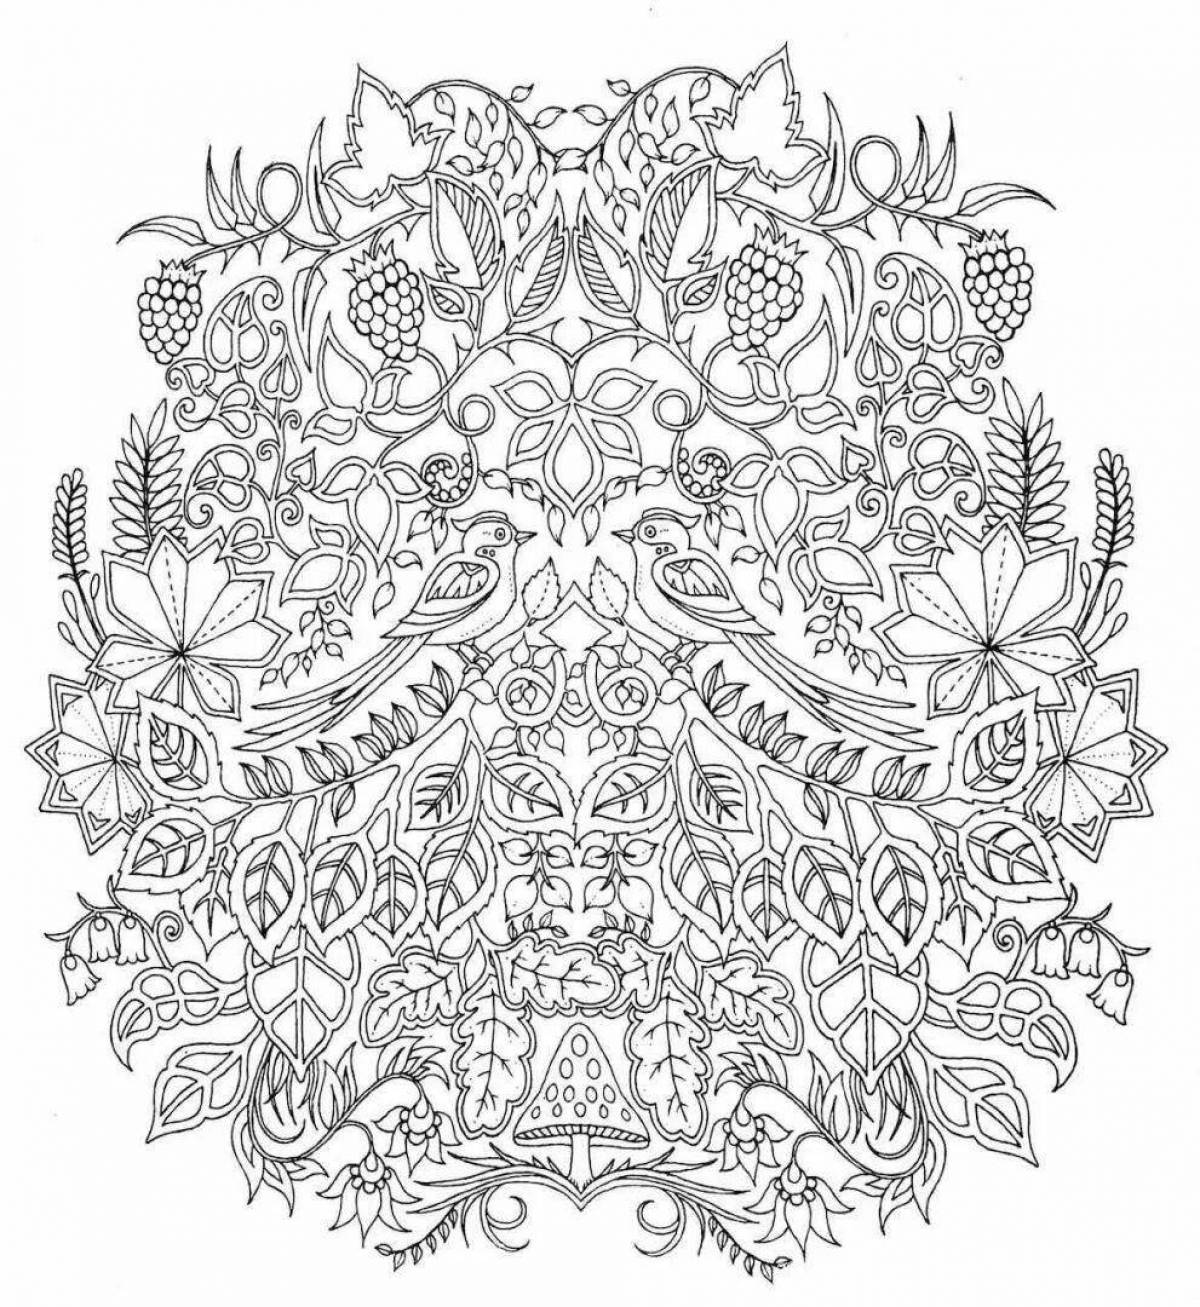 Charming anti-stress forest coloring book